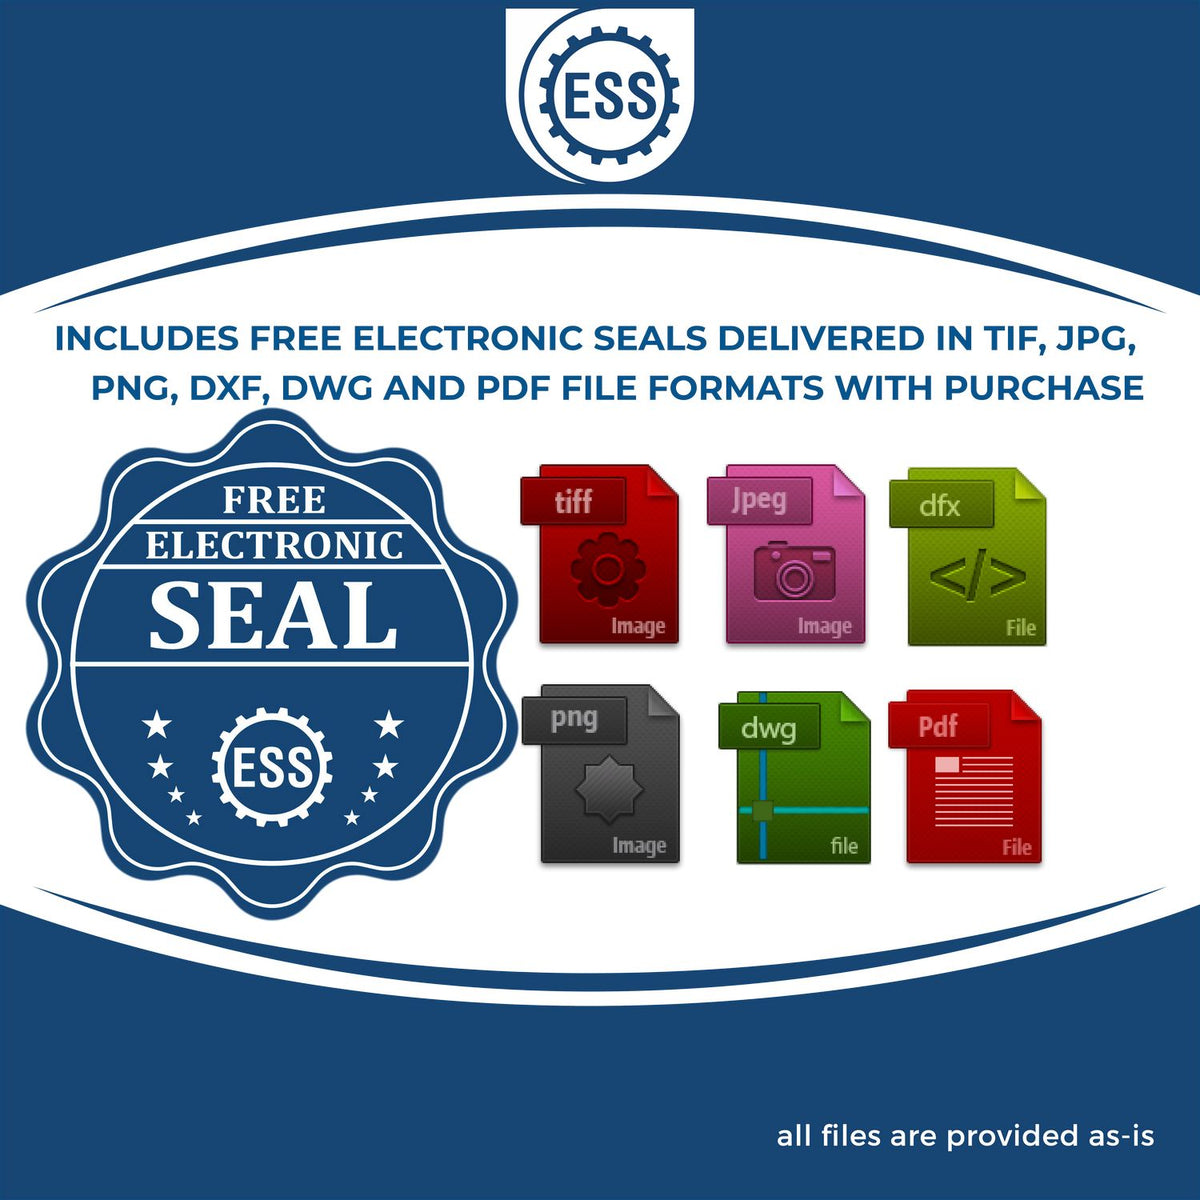 An infographic for the free electronic seal for the Hybrid Indiana Architect Seal illustrating the different file type icons such as DXF, DWG, TIF, JPG and PNG.